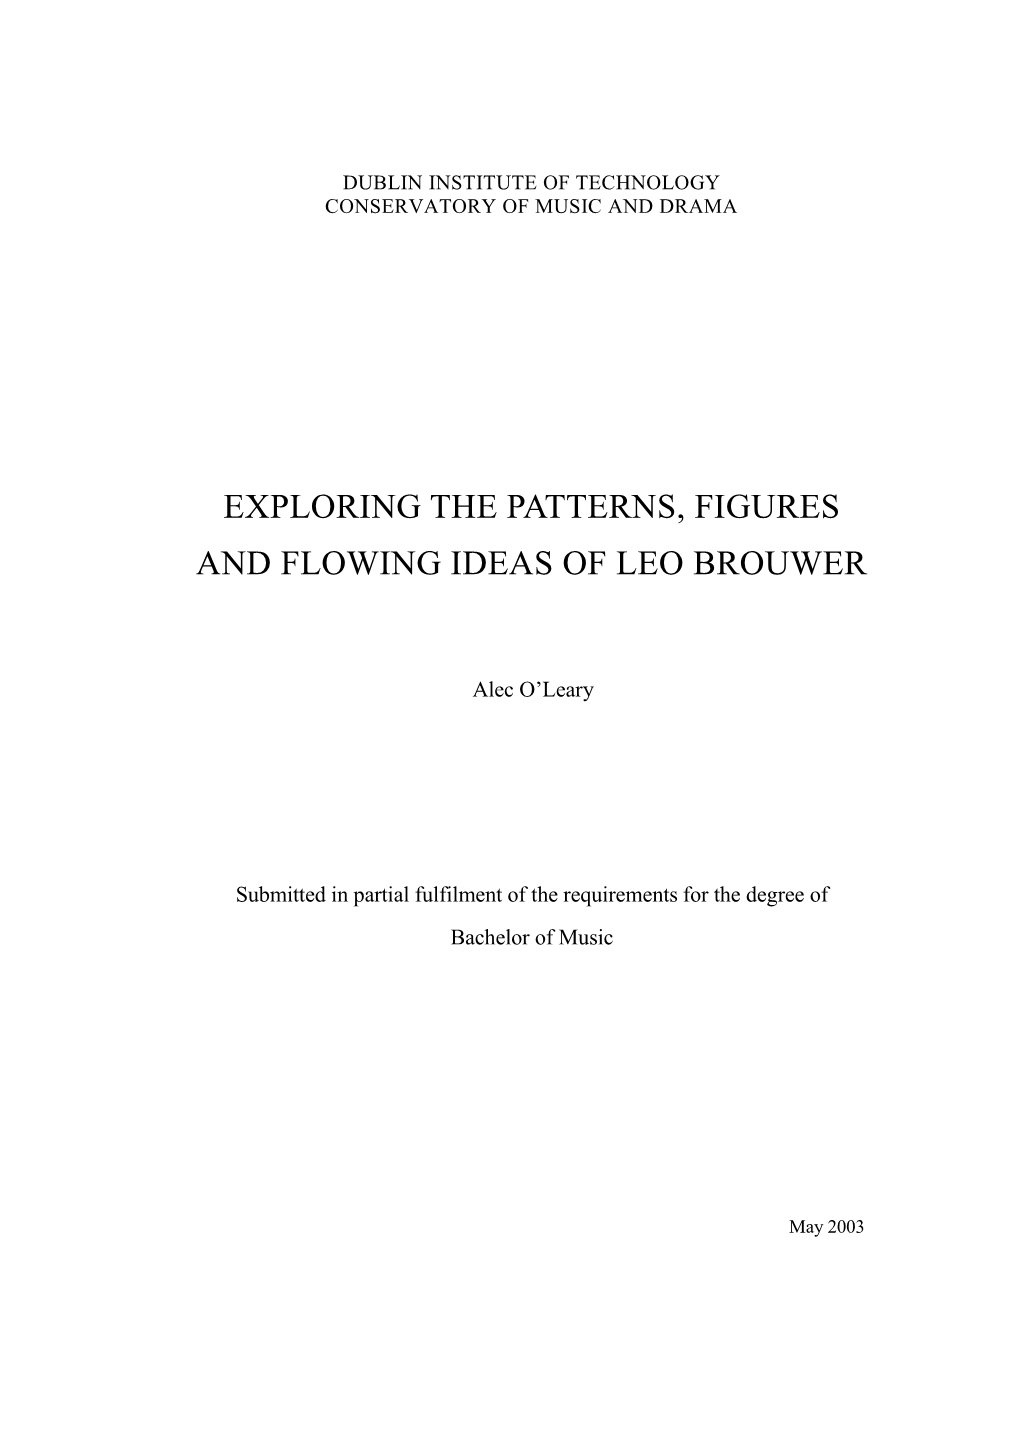 Exploring the Patterns, Figures and Flowing Ideas of Leo Brouwer